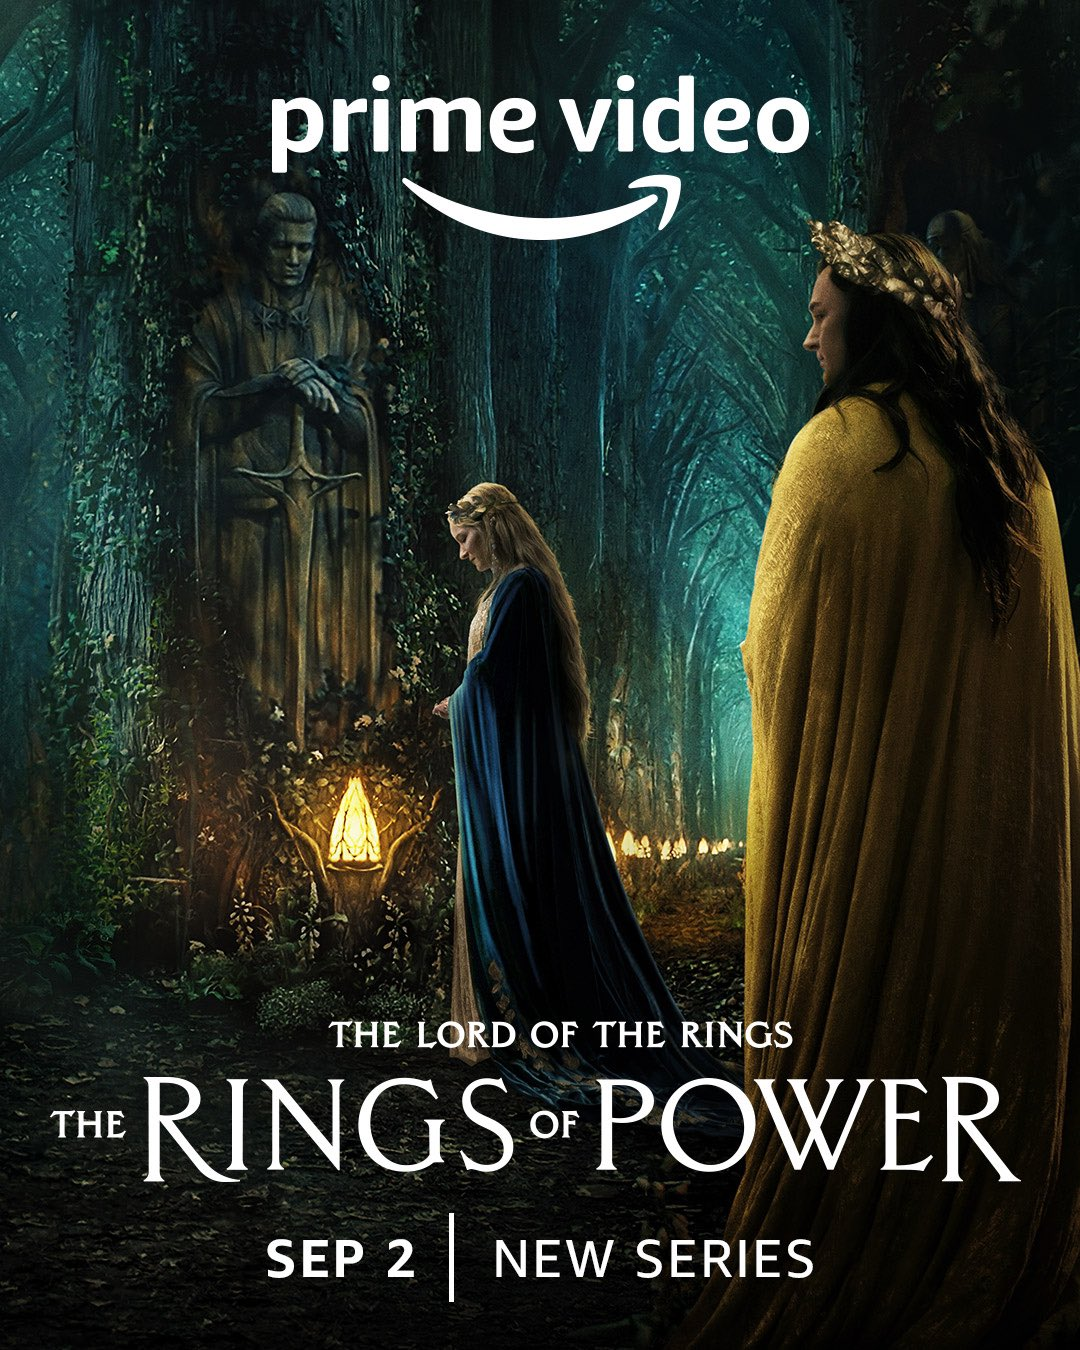 LOTR_Rings_of_Power_poster_August_8.png